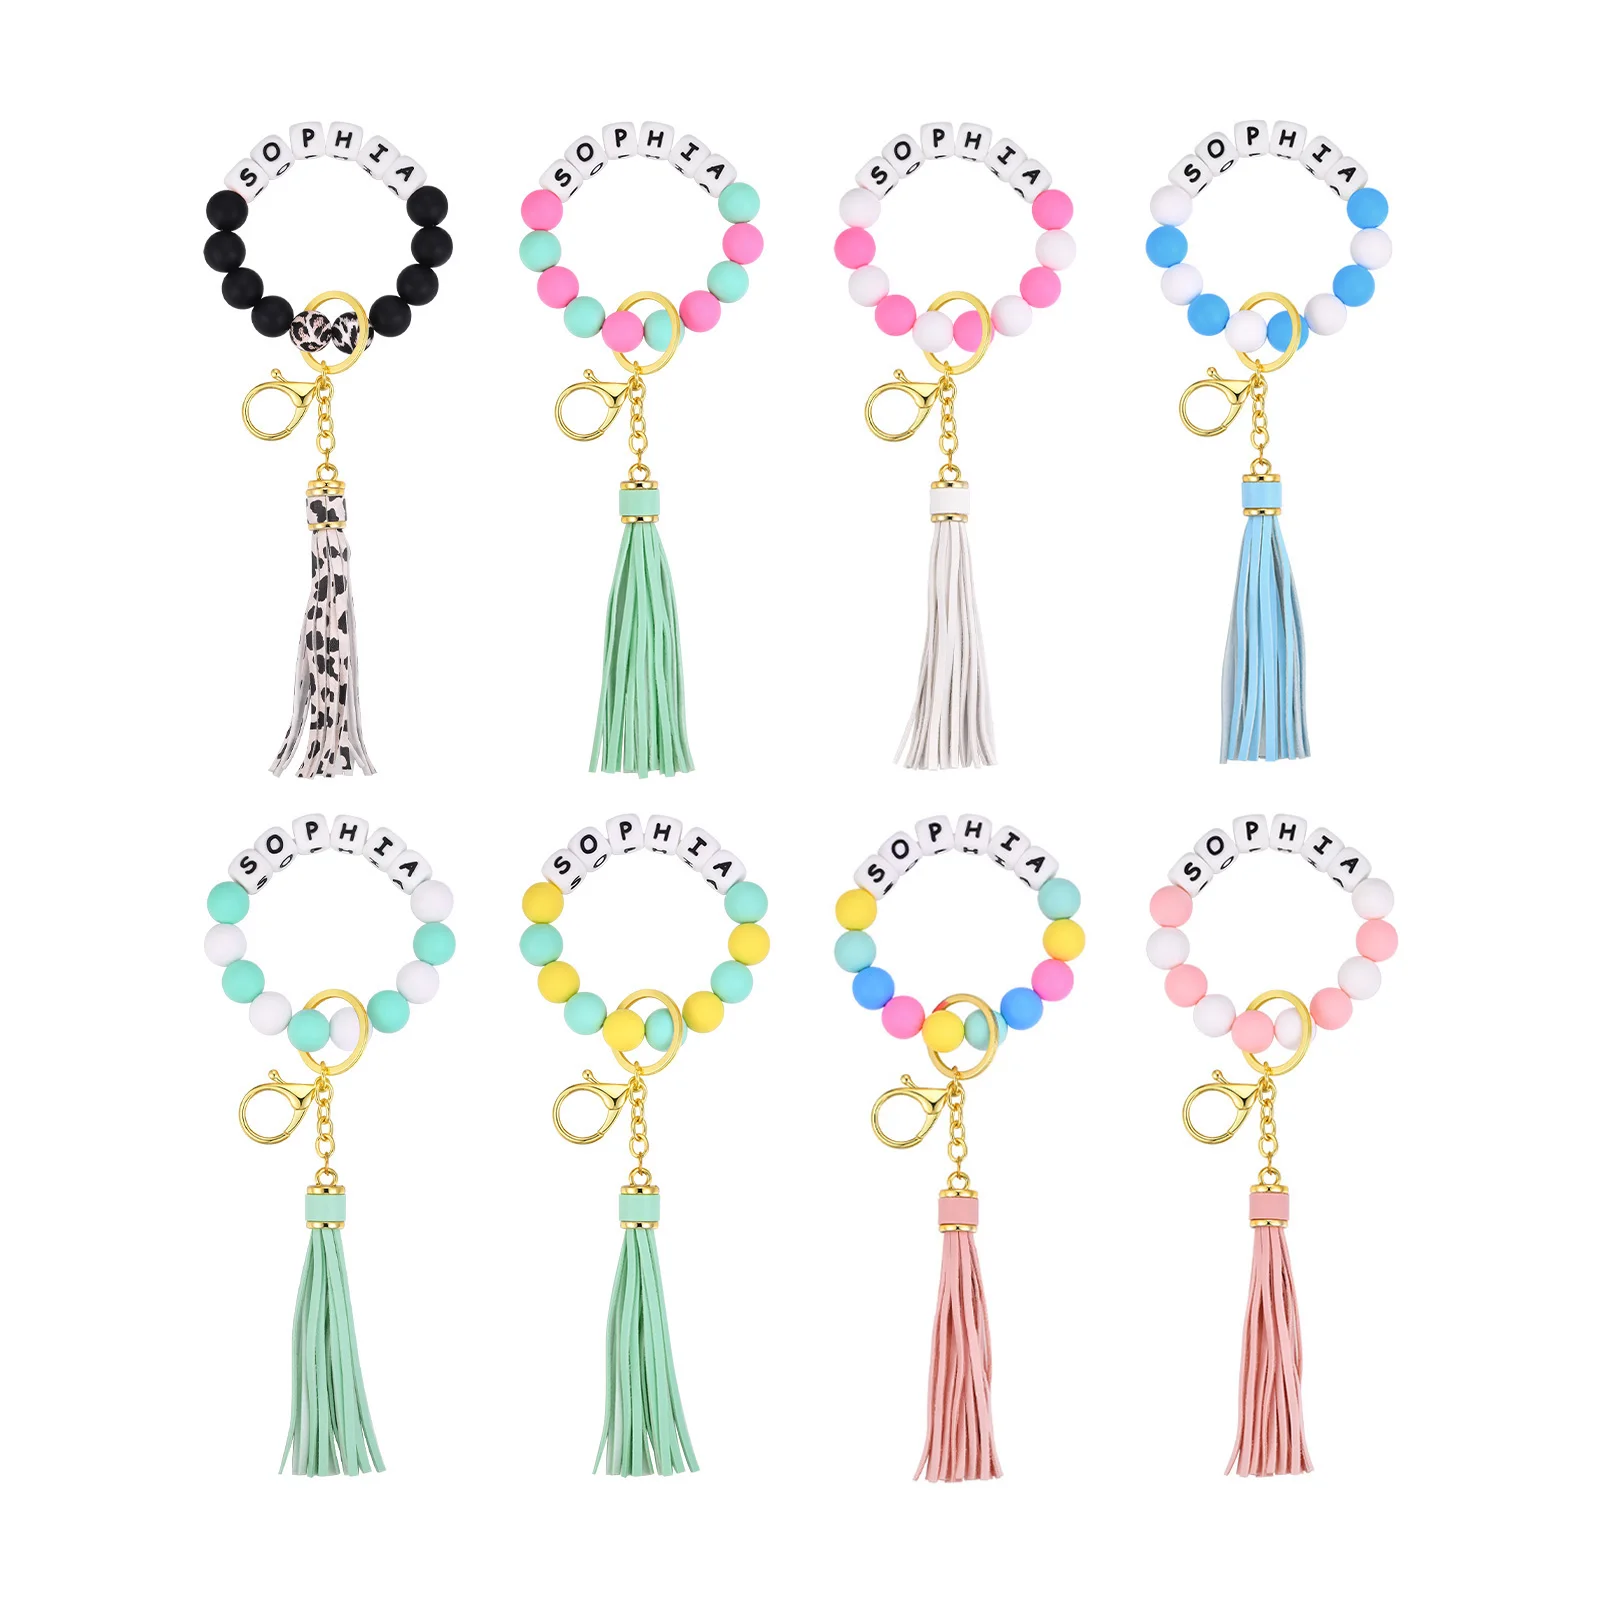 Personalized Name Keychain Bracelet Silicone Beaded Key Ring Wristlet Leather Tassel Wrist Key Ring Bangle Keyring for Women 1 5pcs wooden cone ring organizer bangle stand bracelet anklet jewelry display watch holder earring storage